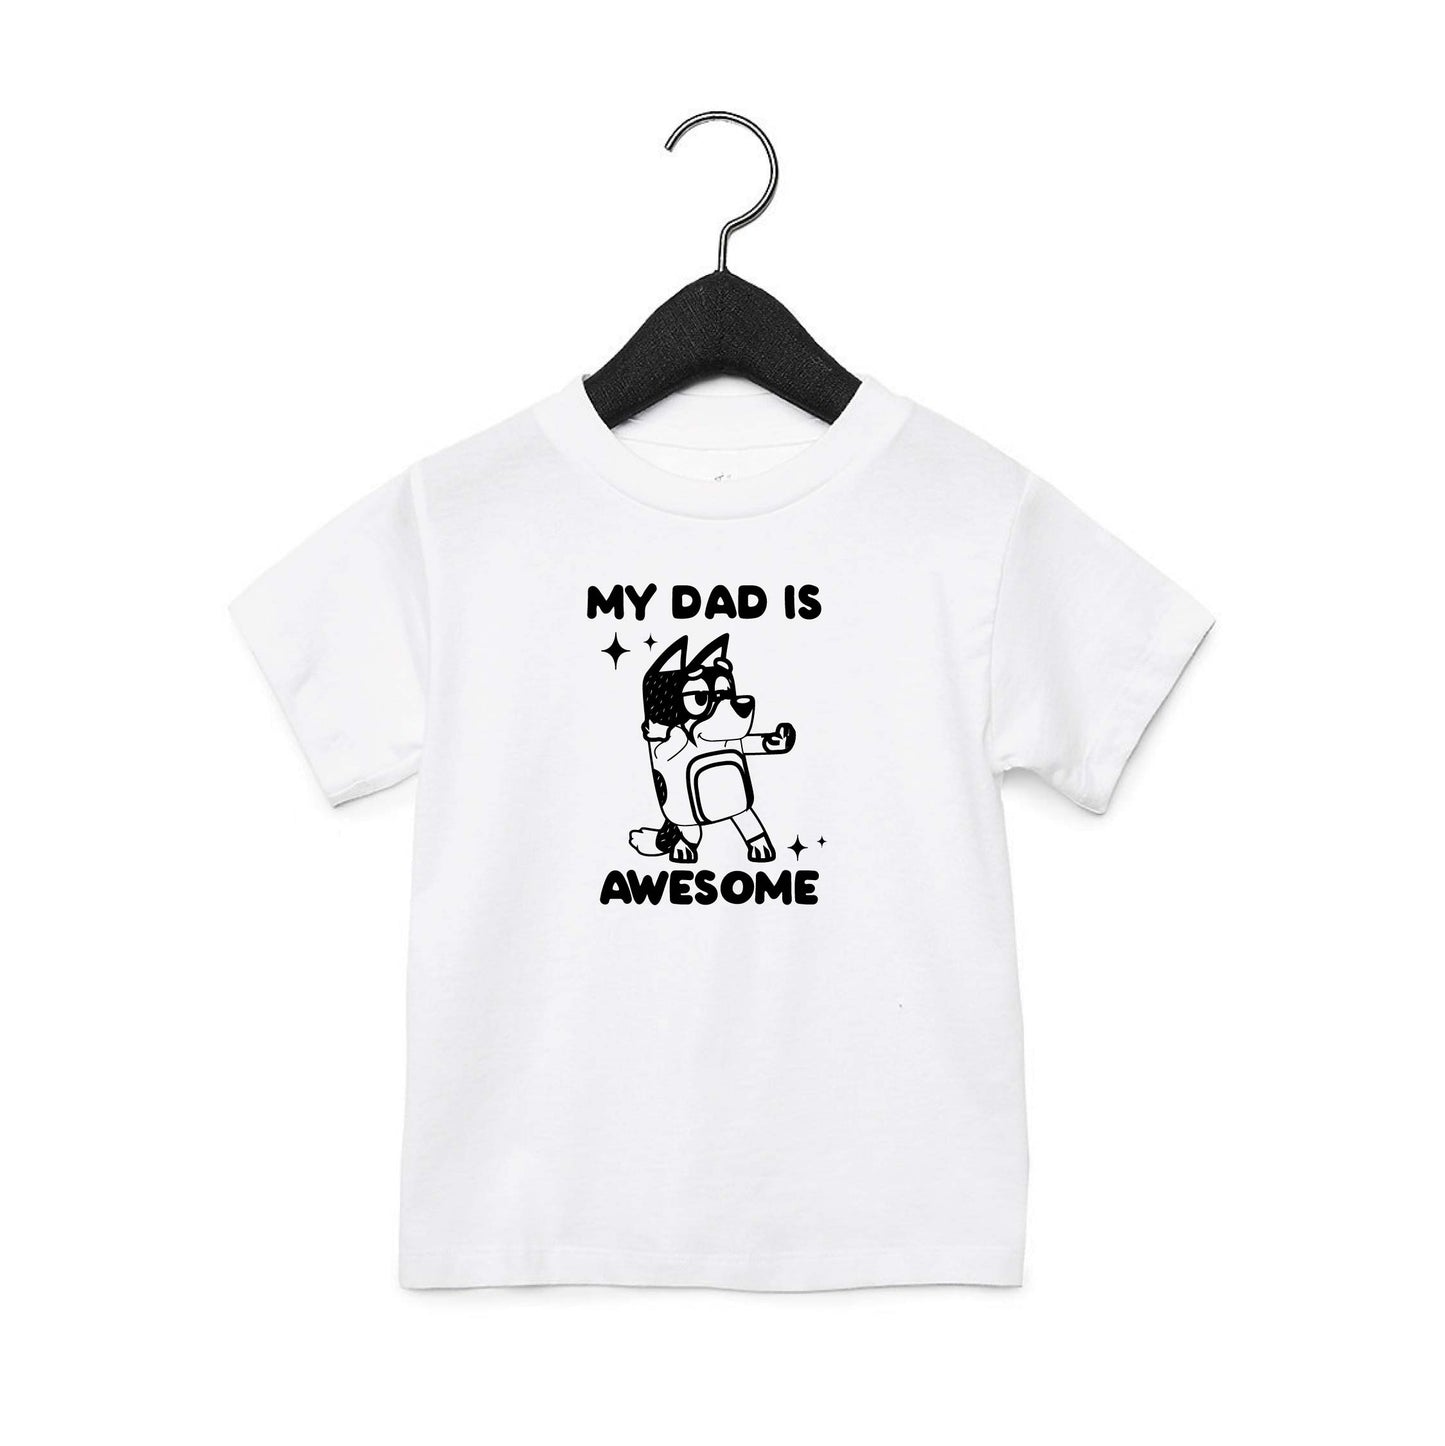 MY DAD IS AWESOME ORGANIC TOP